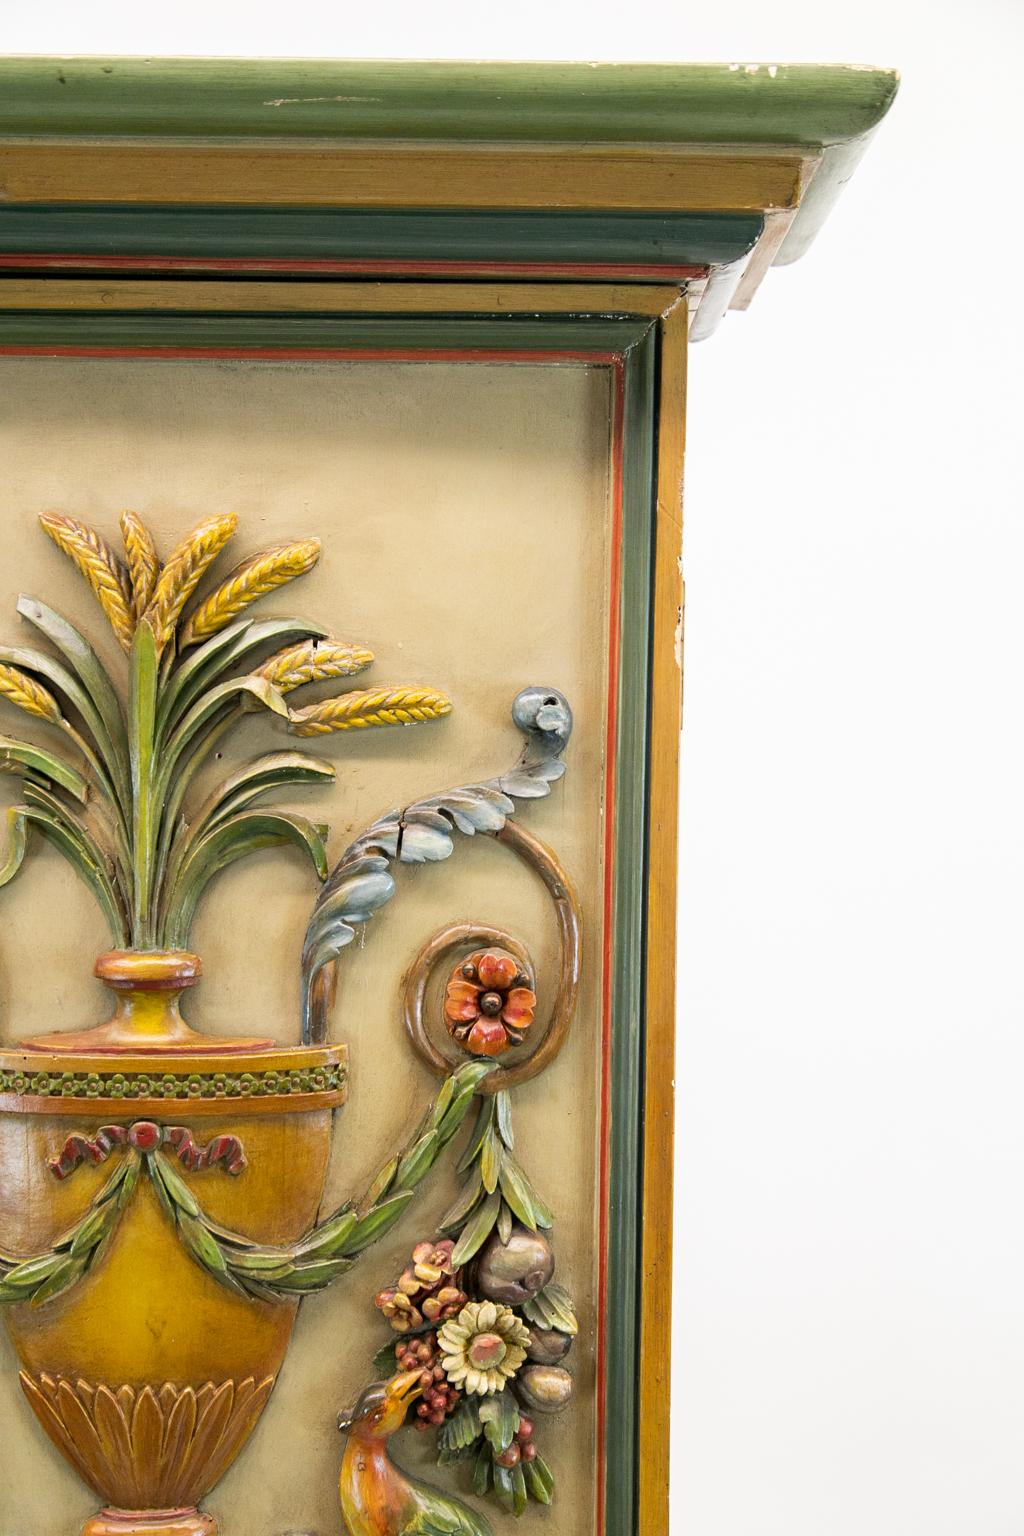 Italianesque cabinet, the door carved in very high relief with a floral urn and birds eating berries perched on floral arabesques. The inside has seven shelves.
   